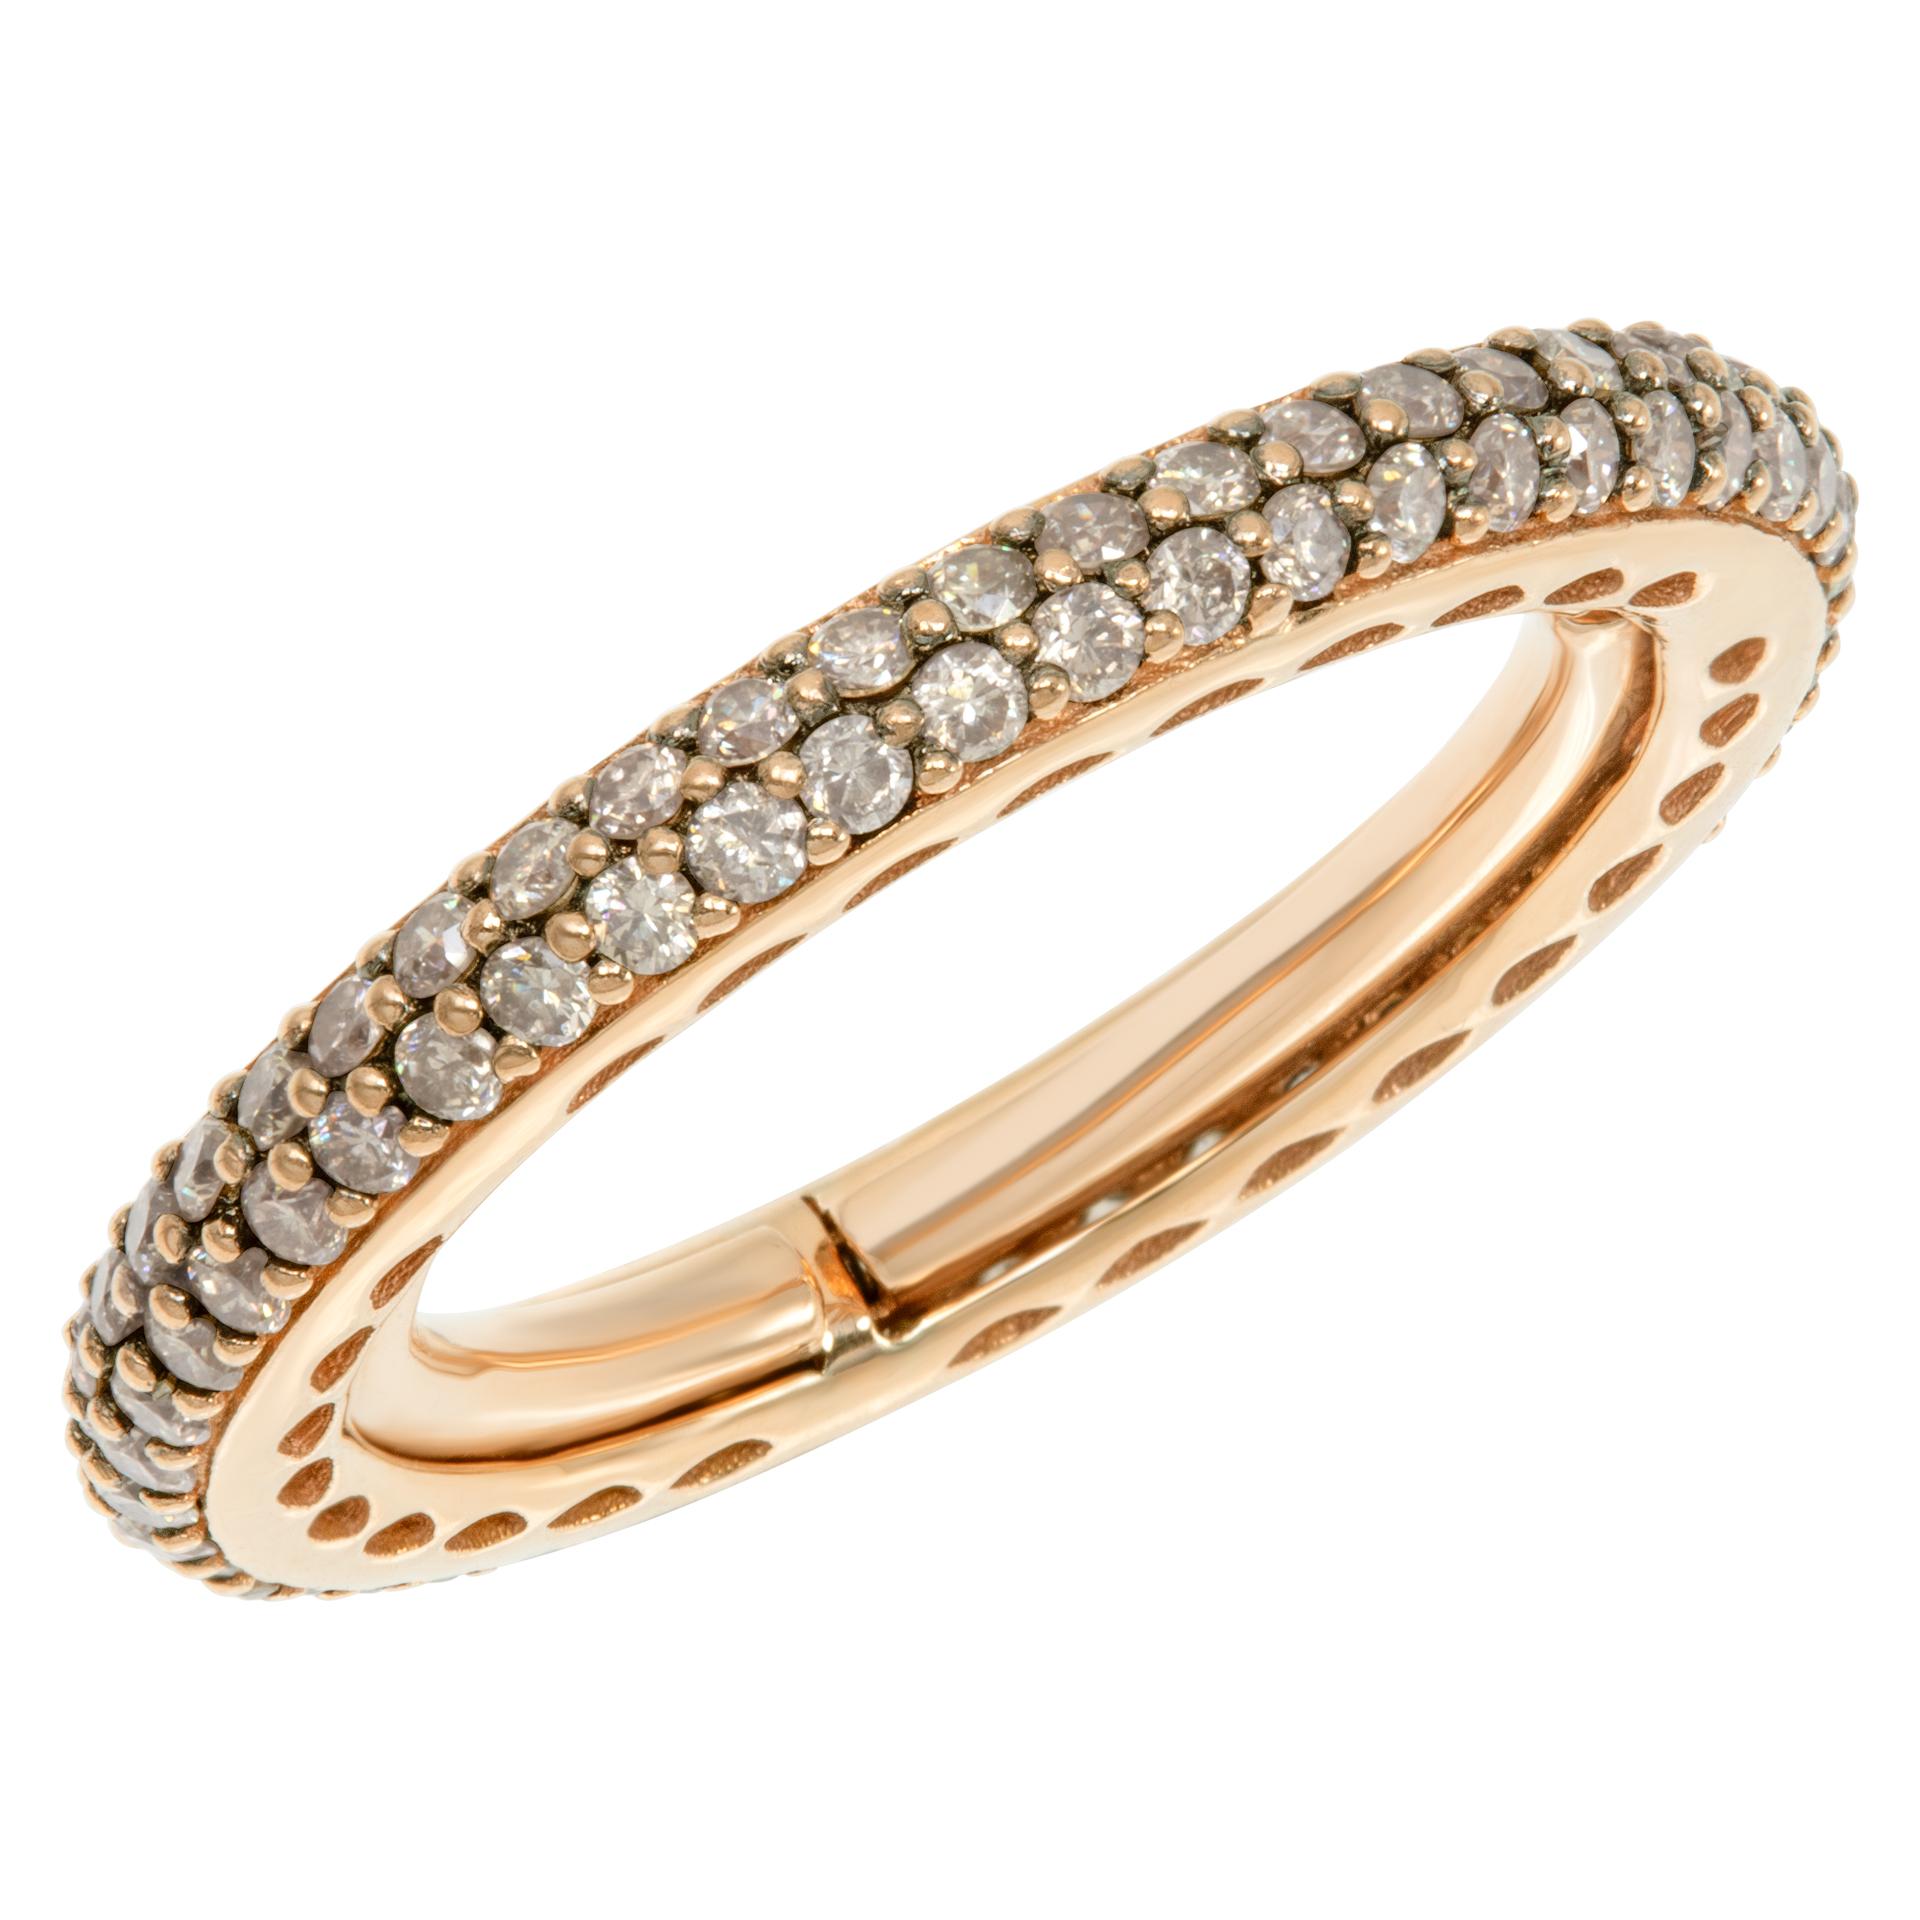 Champaign diamonds eternity band in rose gold. In Excellent Condition For Sale In Surfside, FL